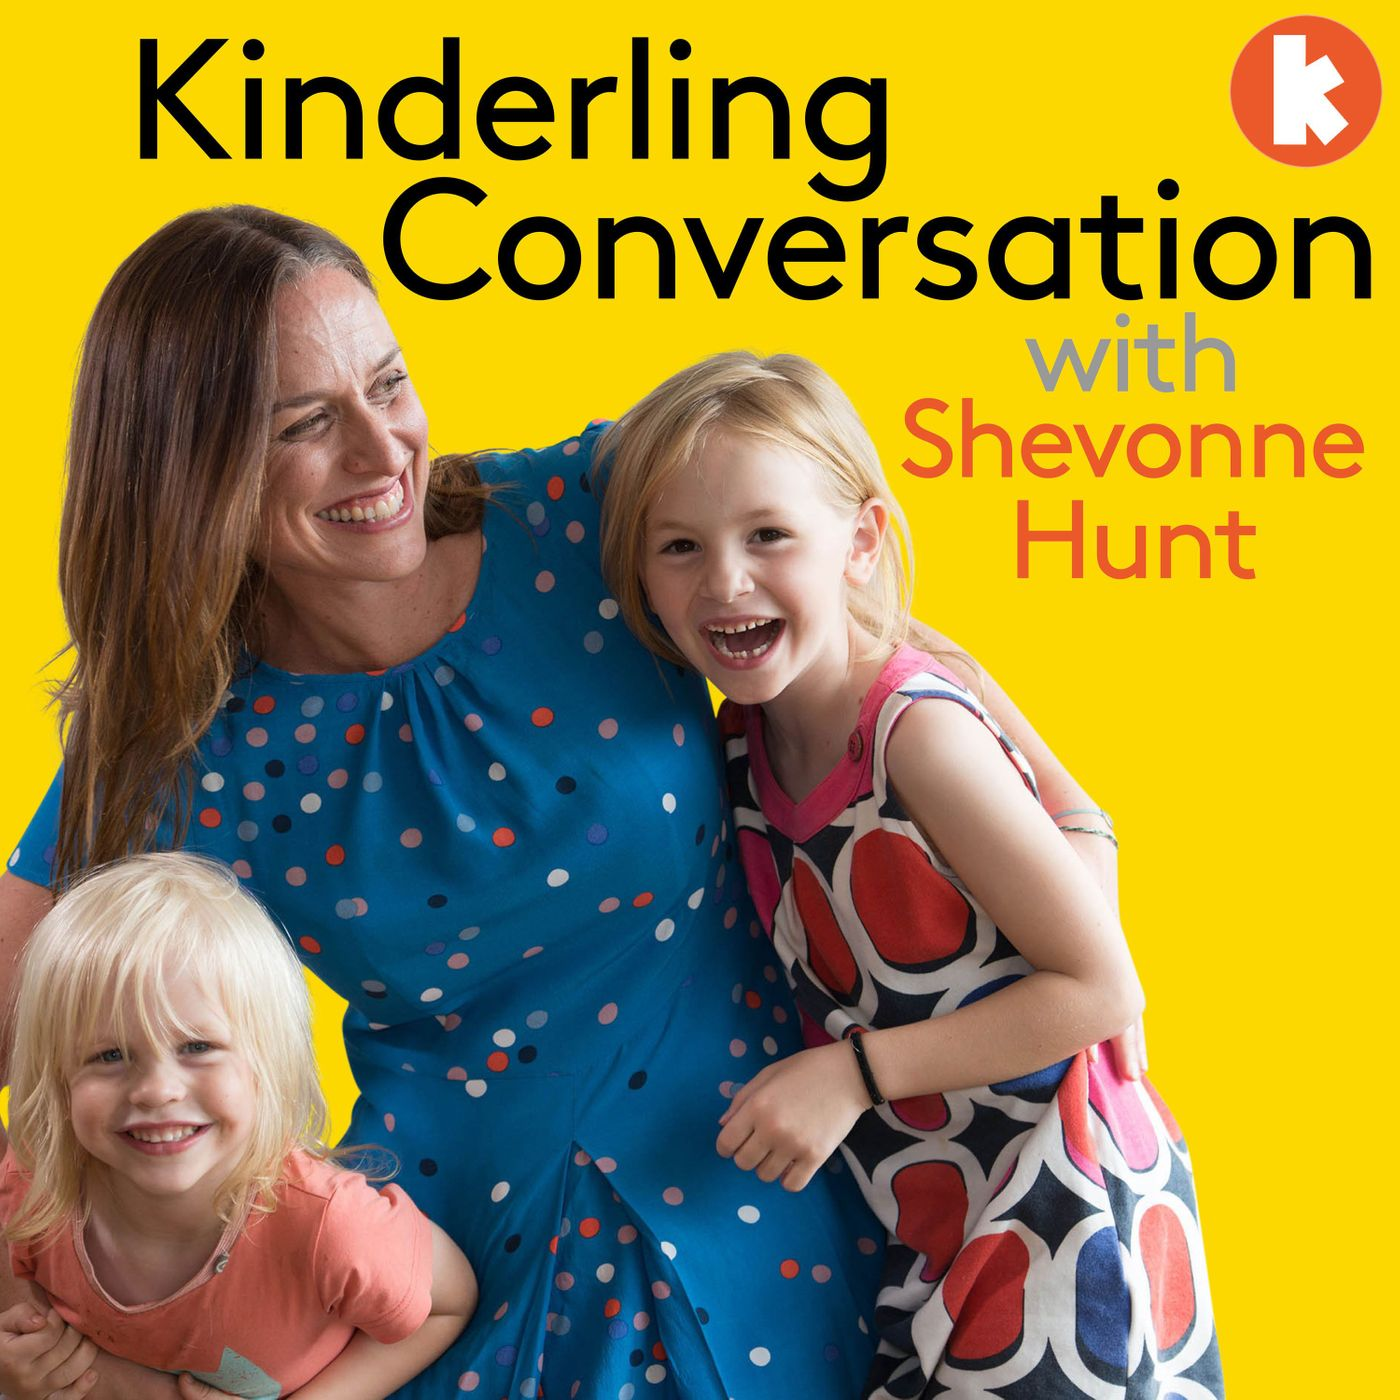 Kinderling Helpline: Sleep And Daycare Routines, When To Ditch Dummies, Nightmares,  Discipline At 17 Months